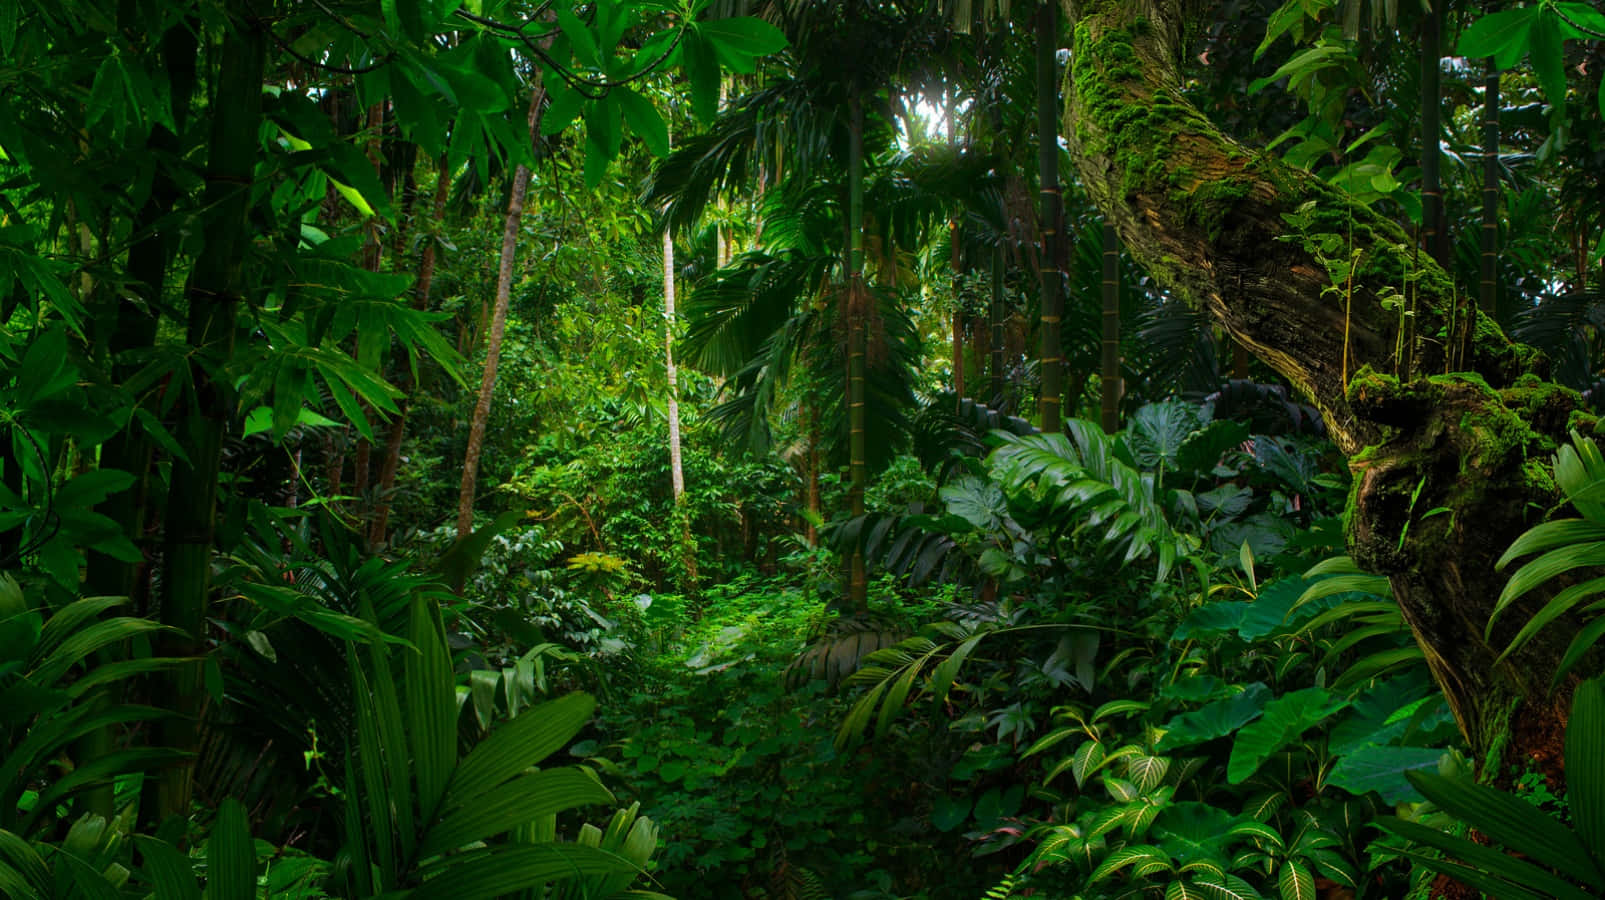 A view of the amazing tropical rainforest